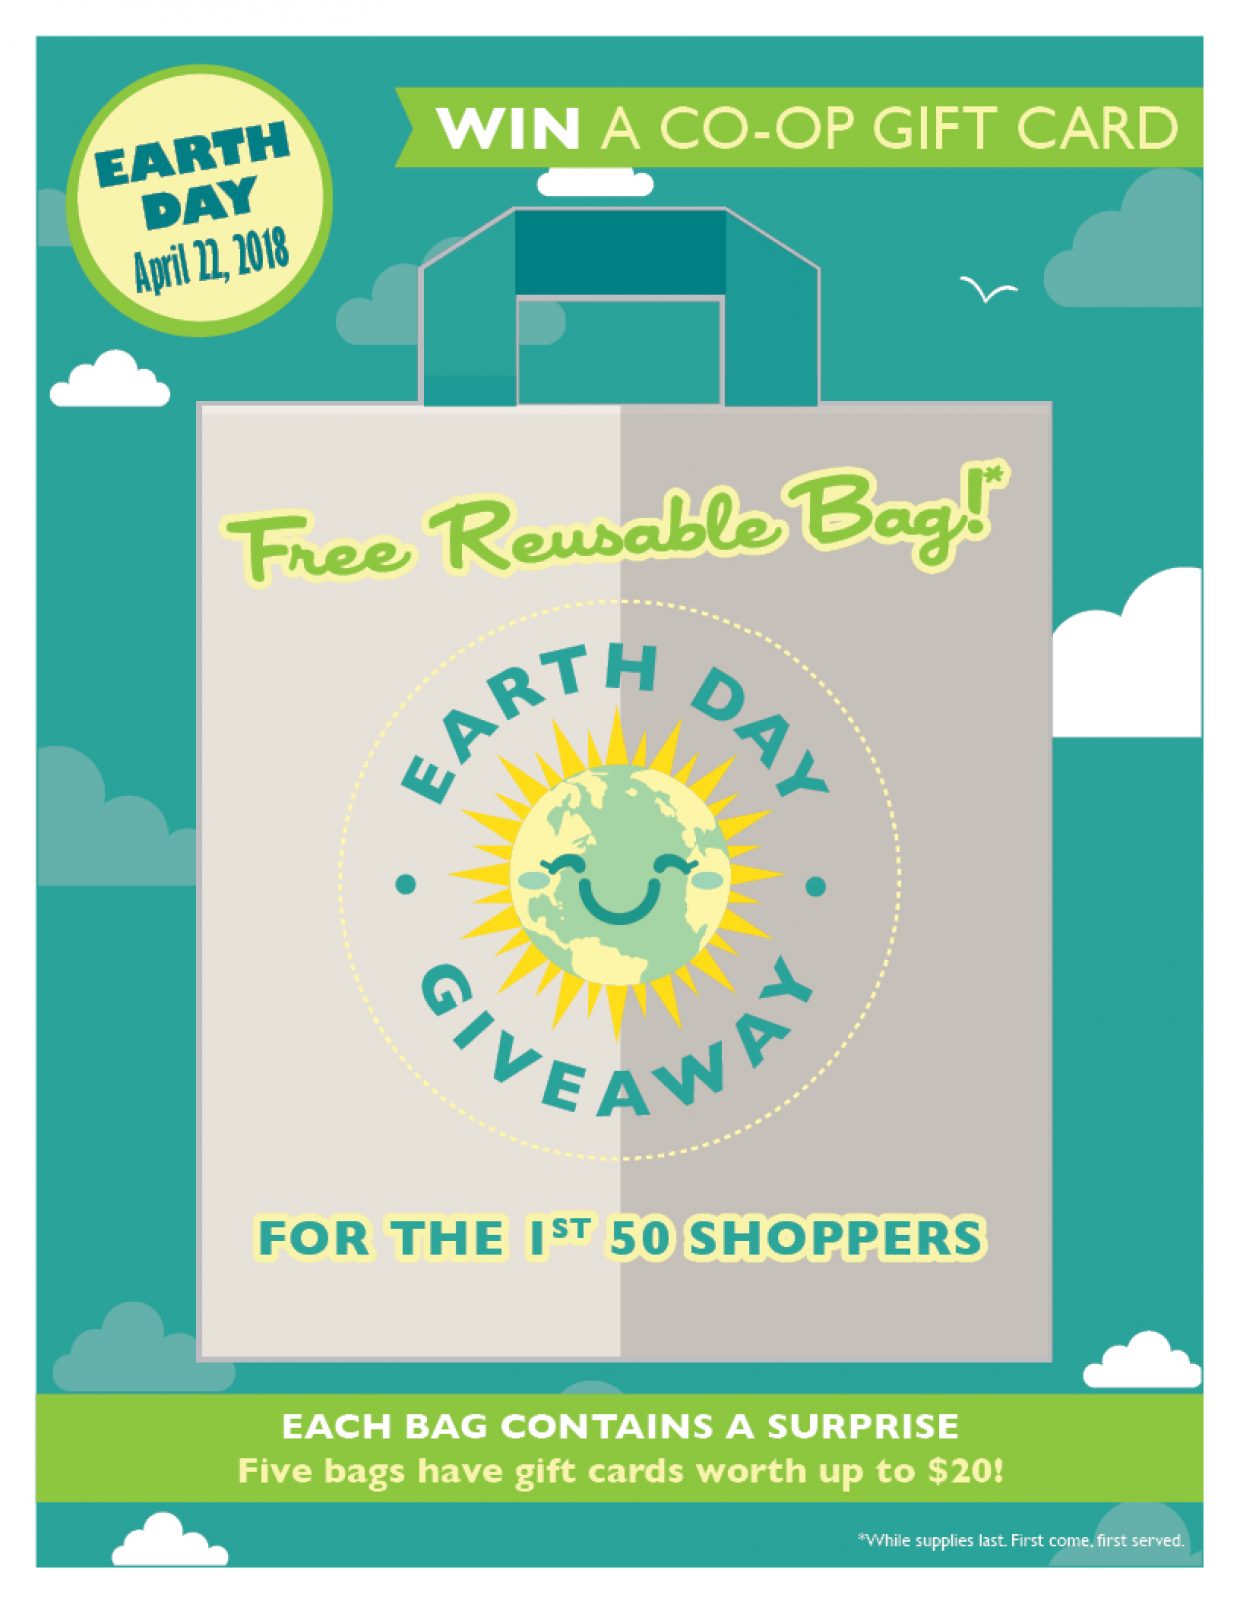 Eco Tips & an Earth Day Surprise!